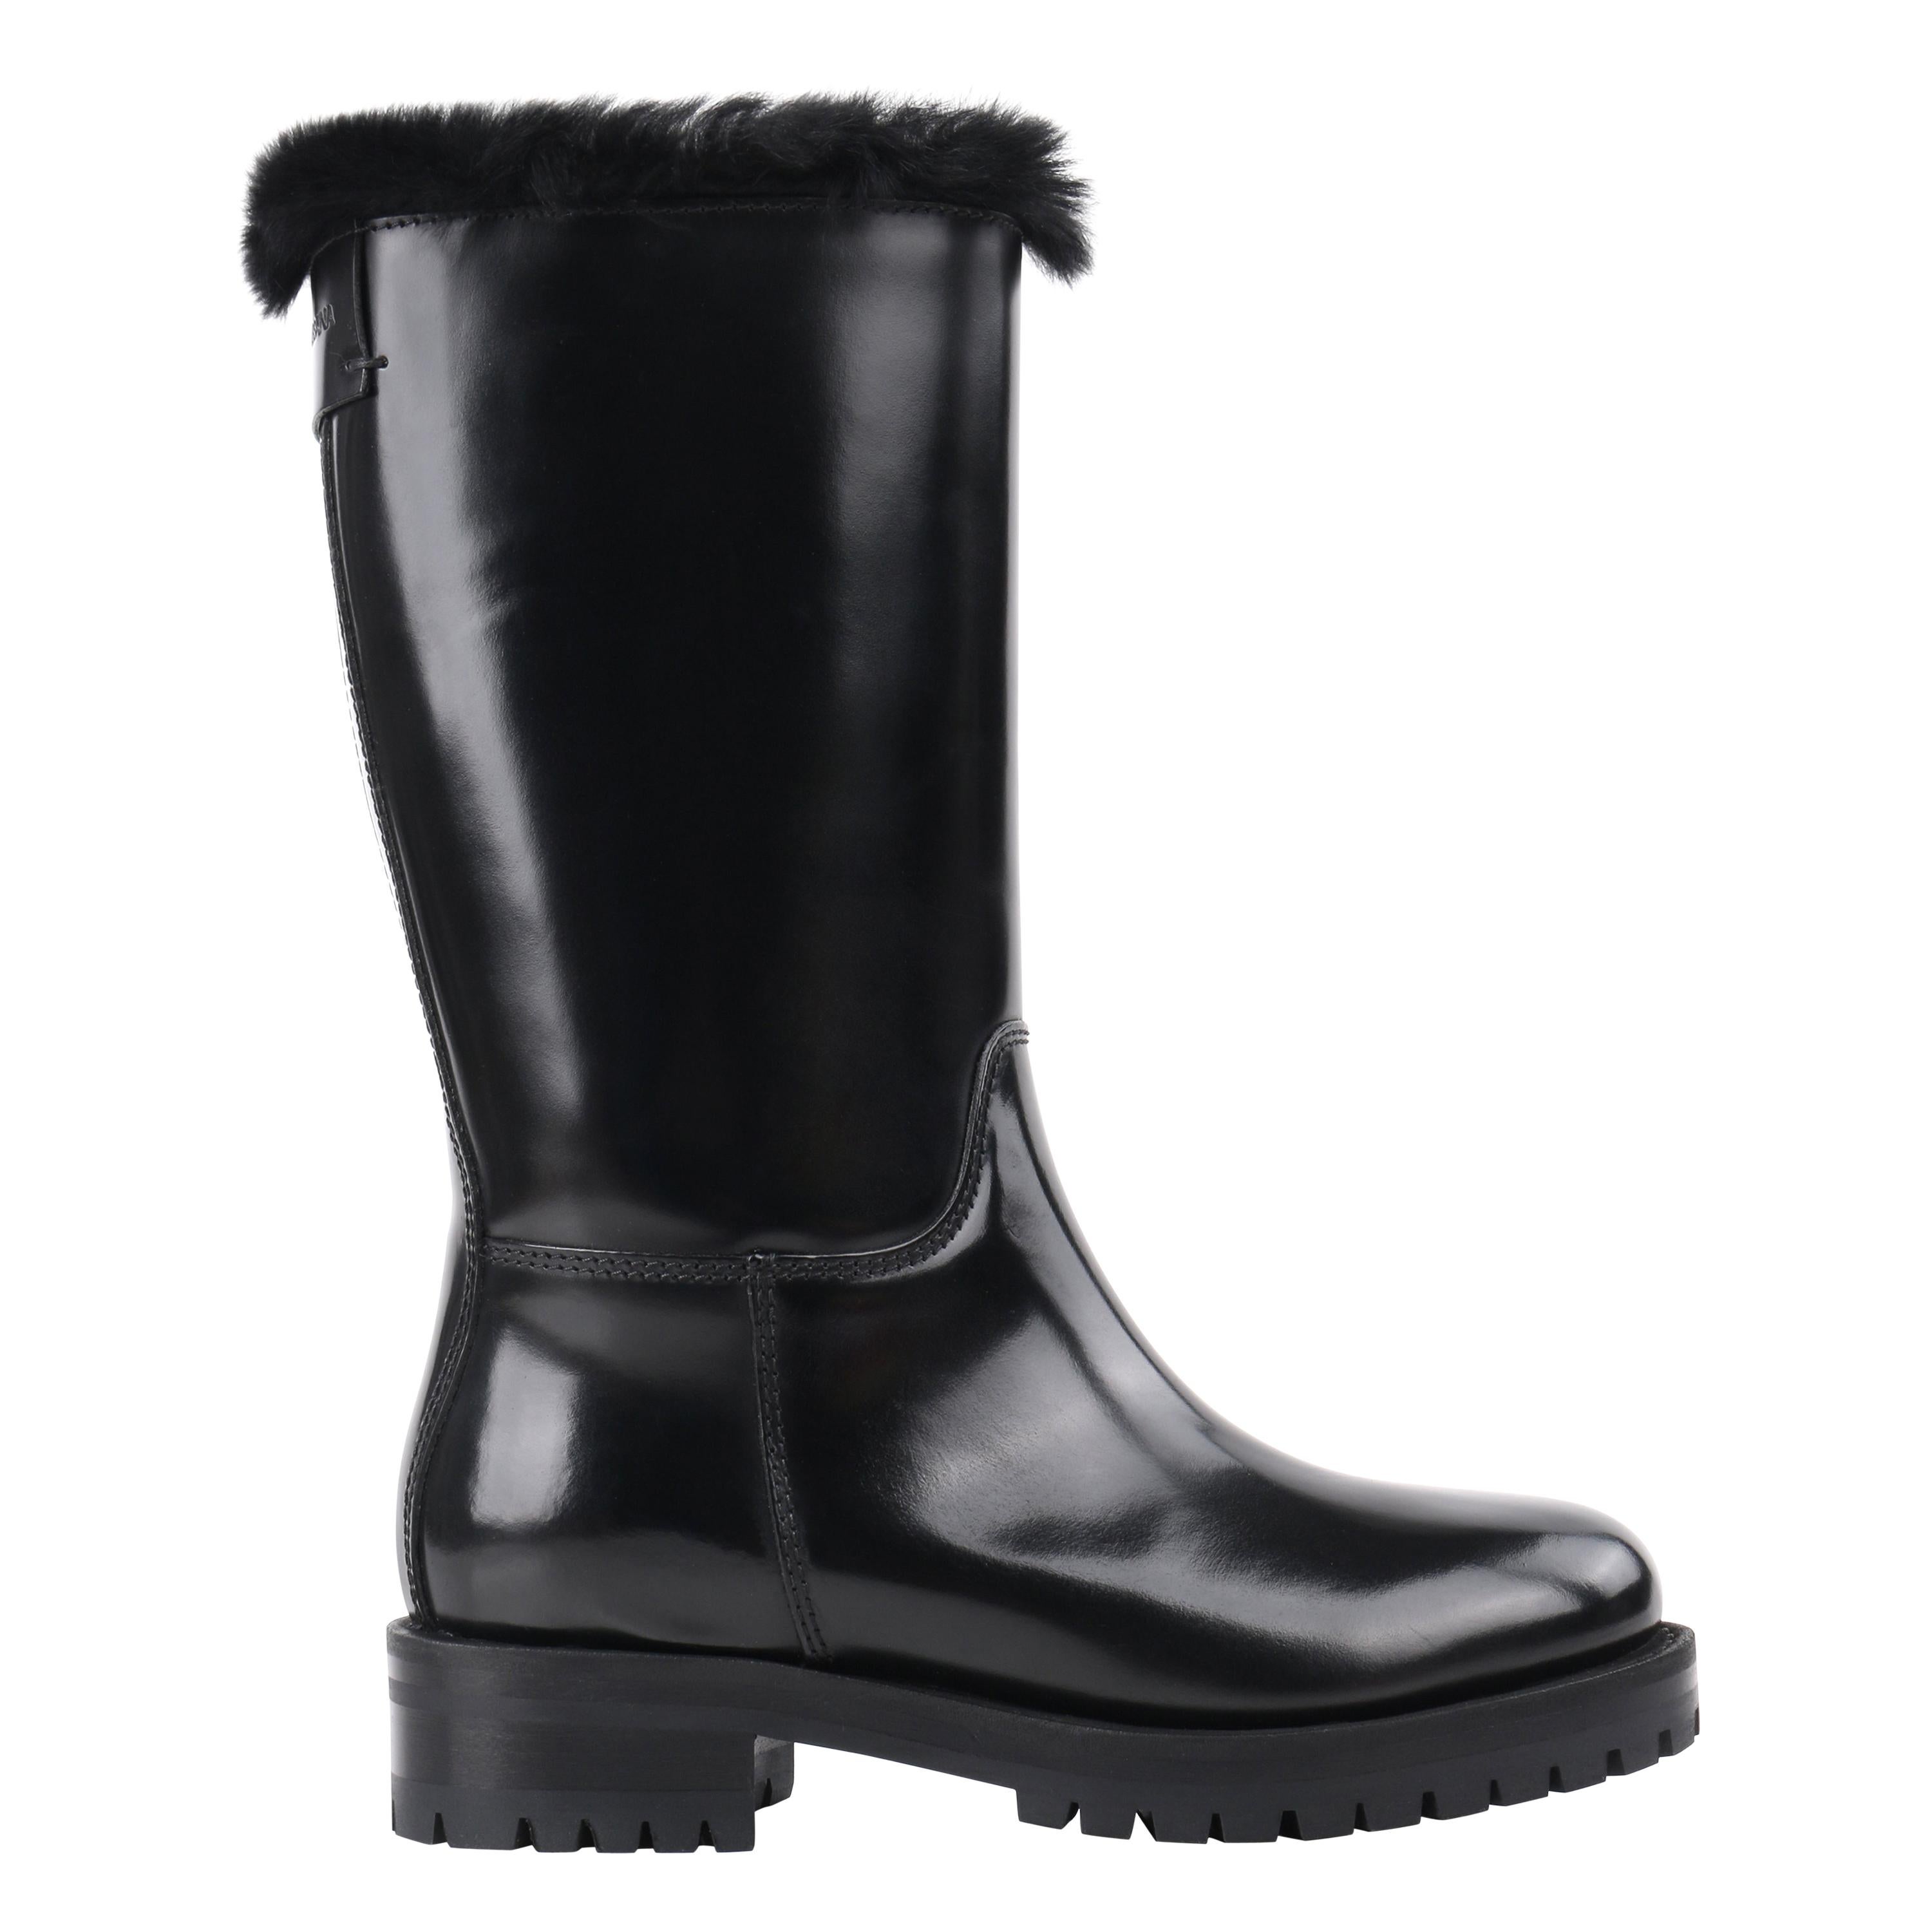 DOLCE & GABBANA Black Leather Lapin Fur Lined Calf High Moto Cold Weather Boots For Sale